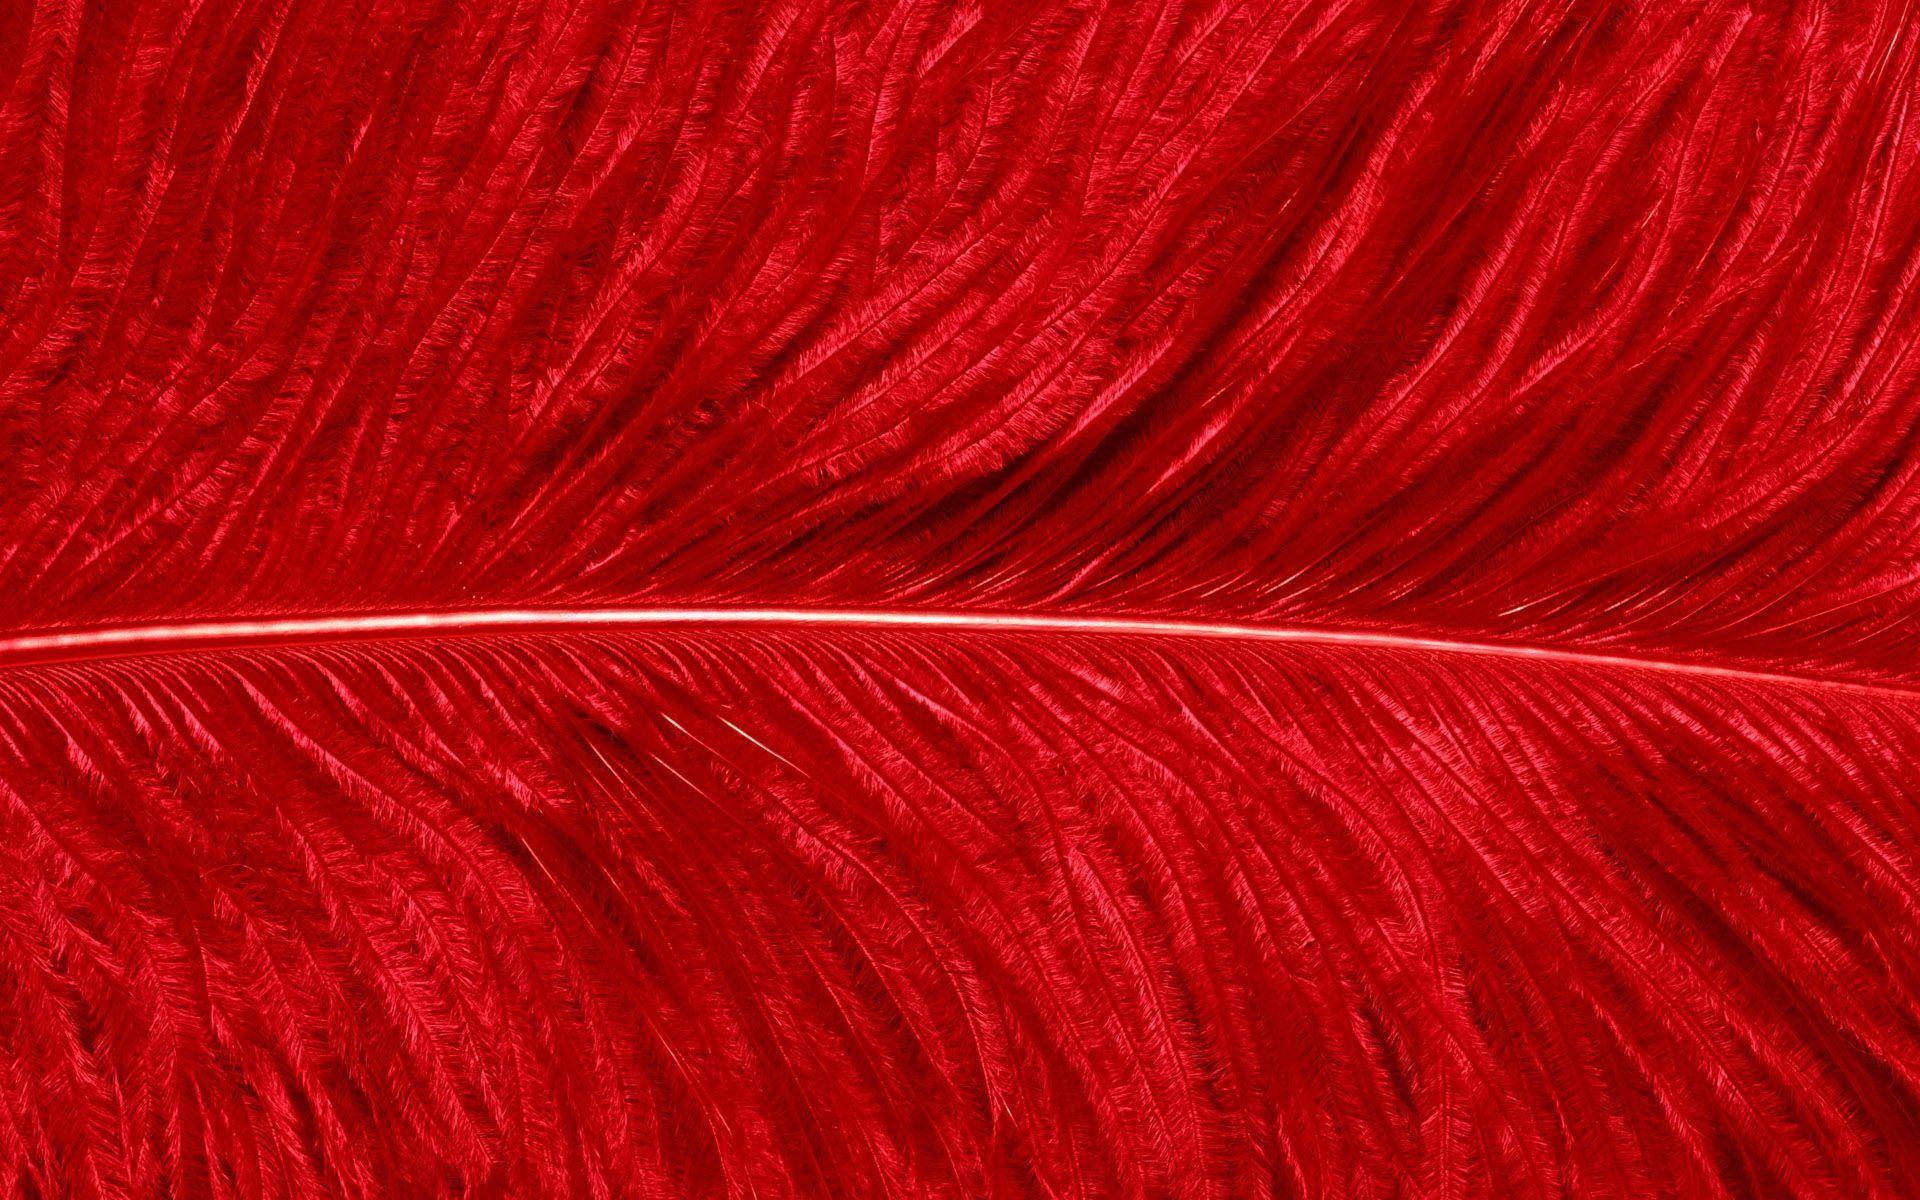 Download texture: red feather texture, download photo, background